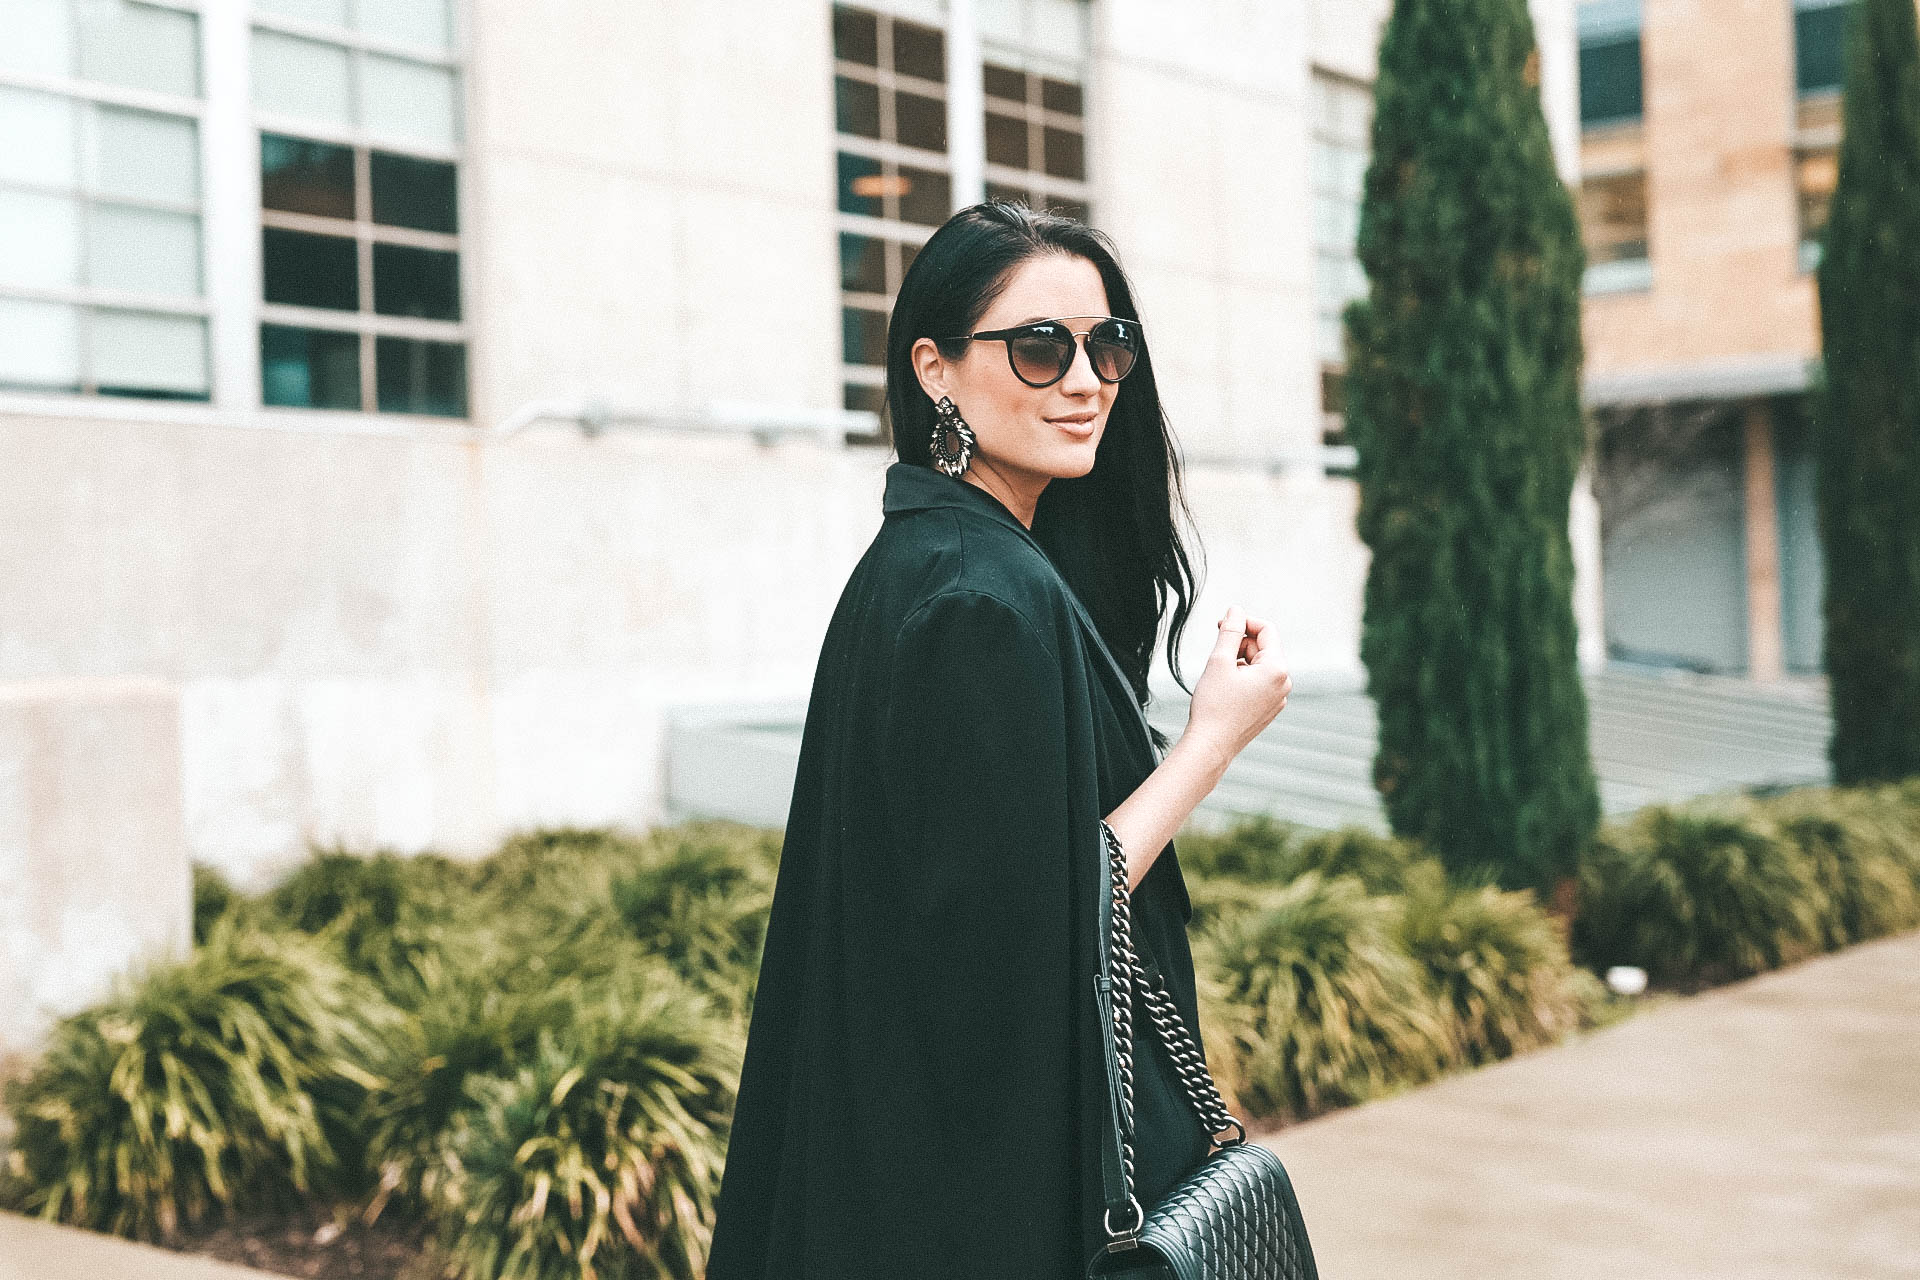 DTKAustin is sharing a major sale alert on the Laundry by Shelli Segal site. This black tuxedo cape and lace cami are both on sale. - Shelli Segal Removable Tuxedo Cap by popular Austin style blogger Dressed to Kill